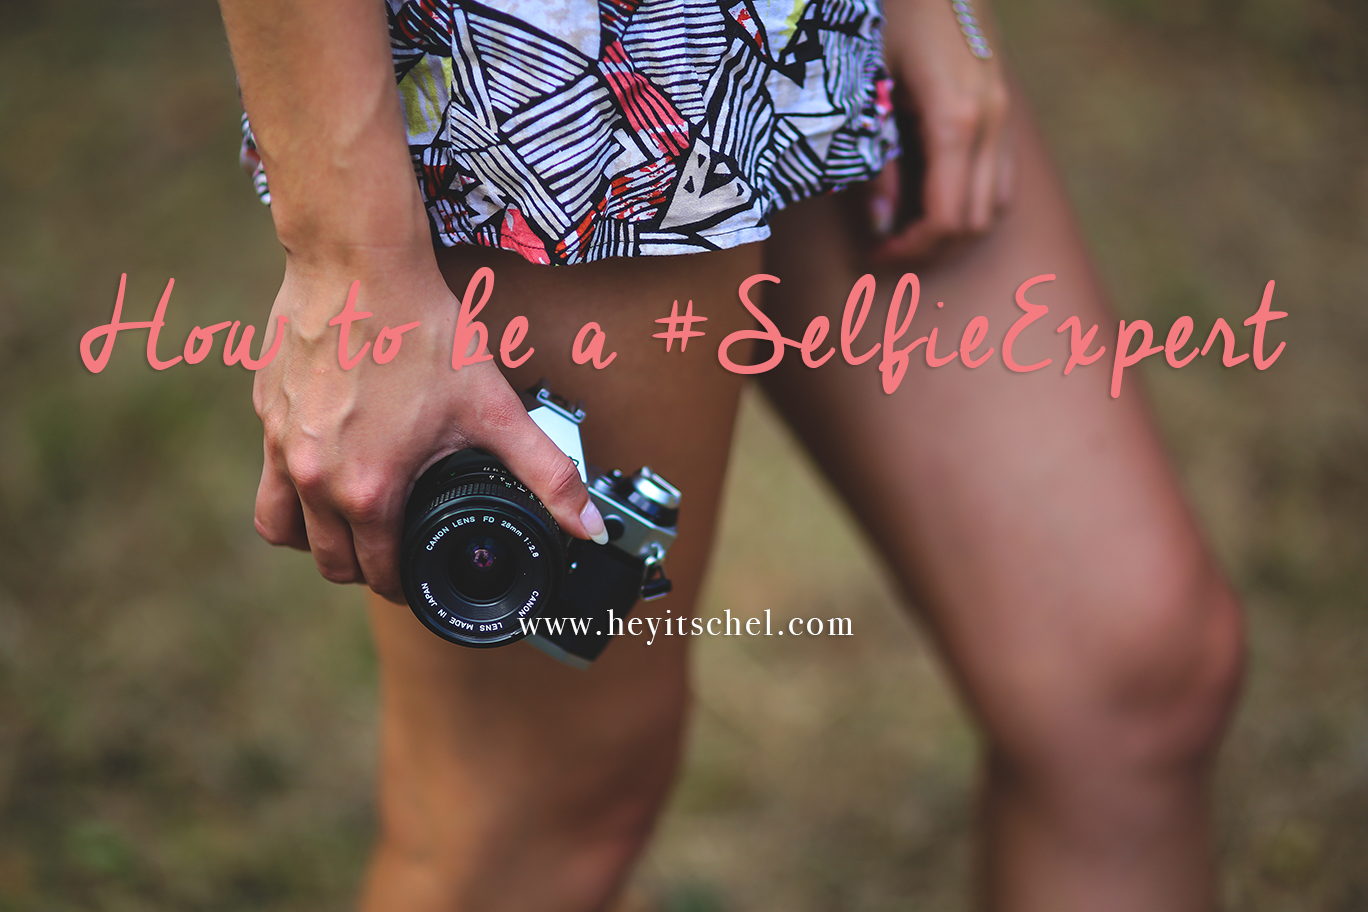 How to be a #SelfieExpert